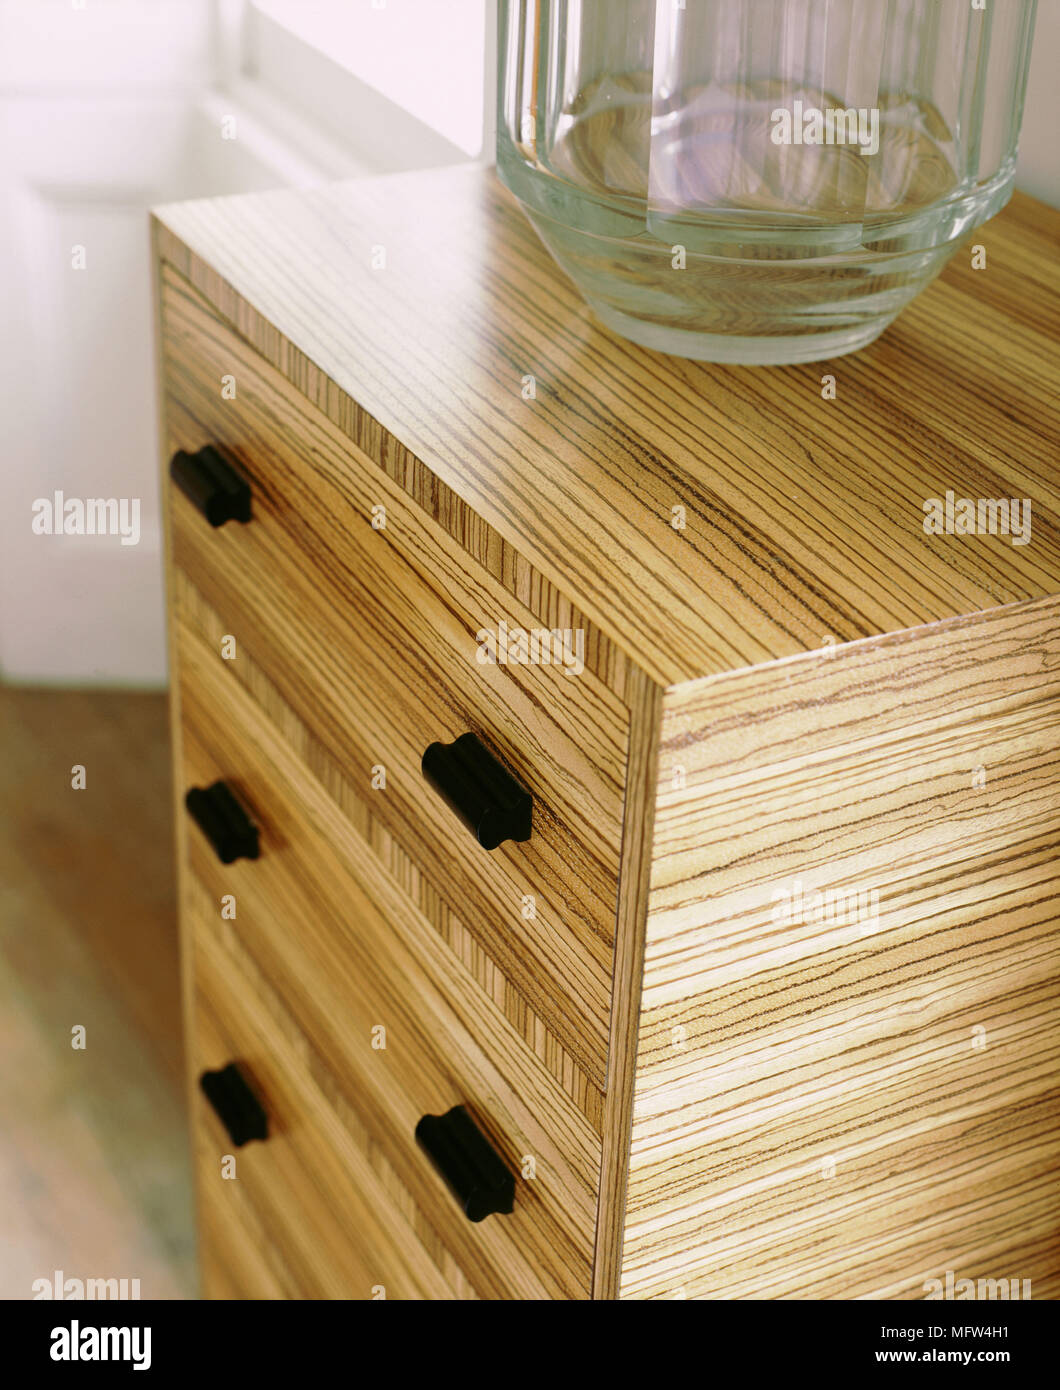 Detail Of A Wood Laminate Dresser With Black Drawer Pulls Stock